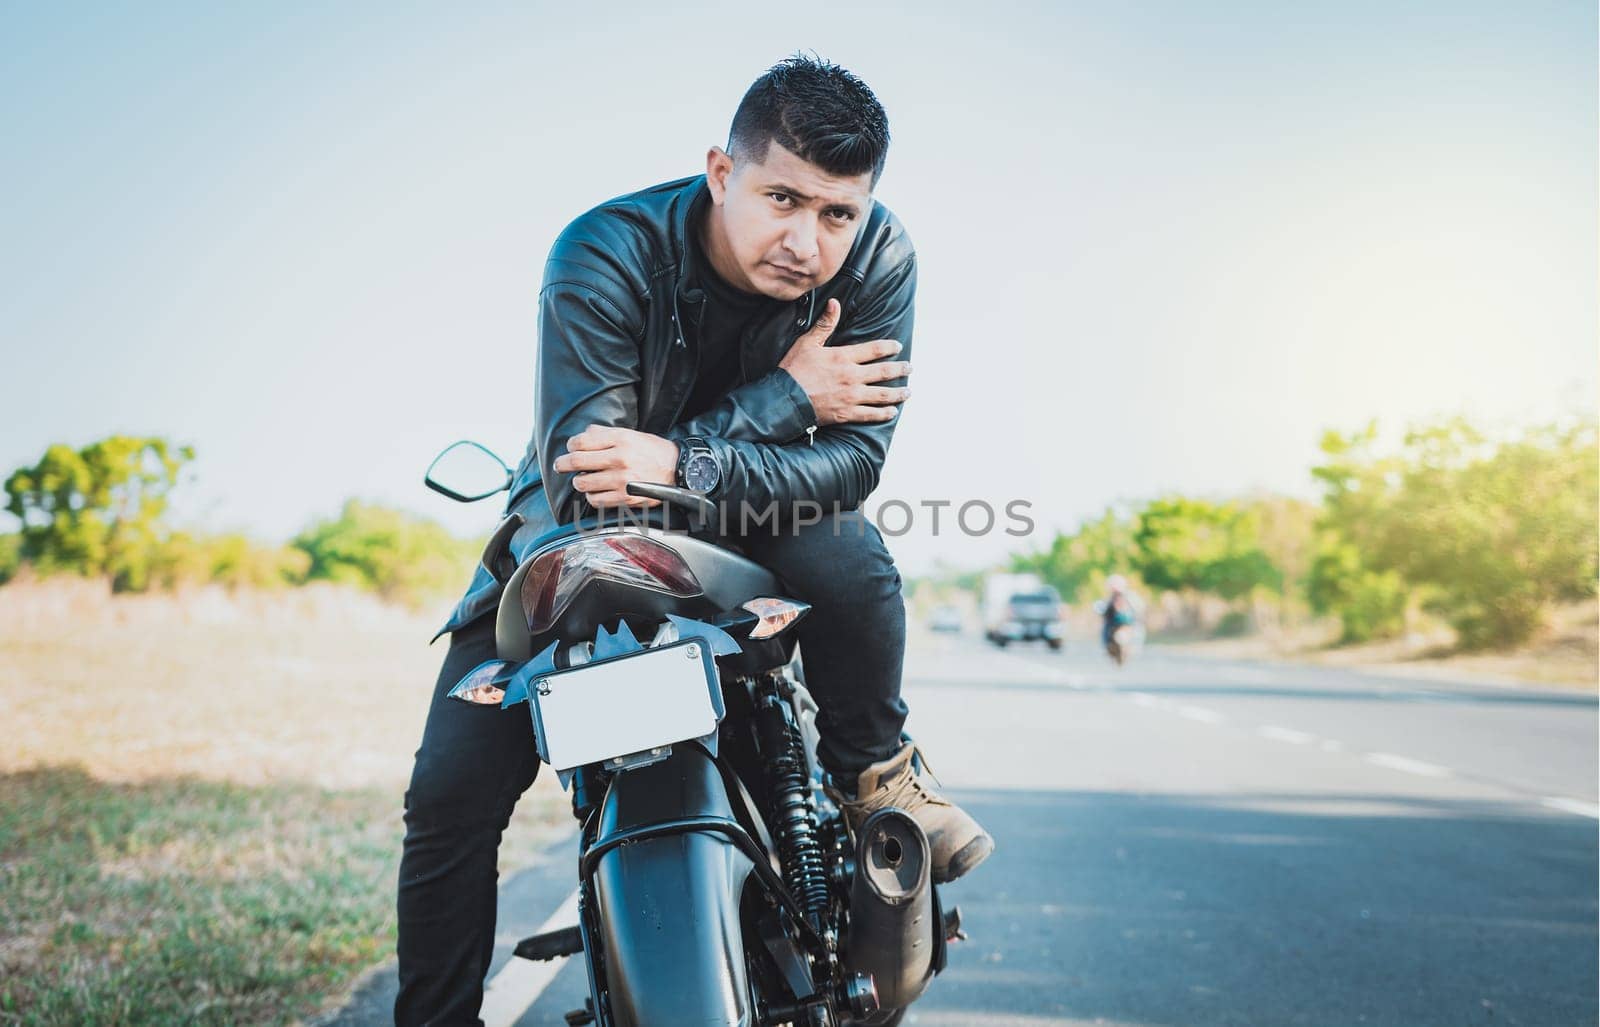 Portrait of handsome biker on his motorbike looking at camera outdoors. Handsome motorcyclist in jacket sitting on his motorcycle at the side of the road by isaiphoto